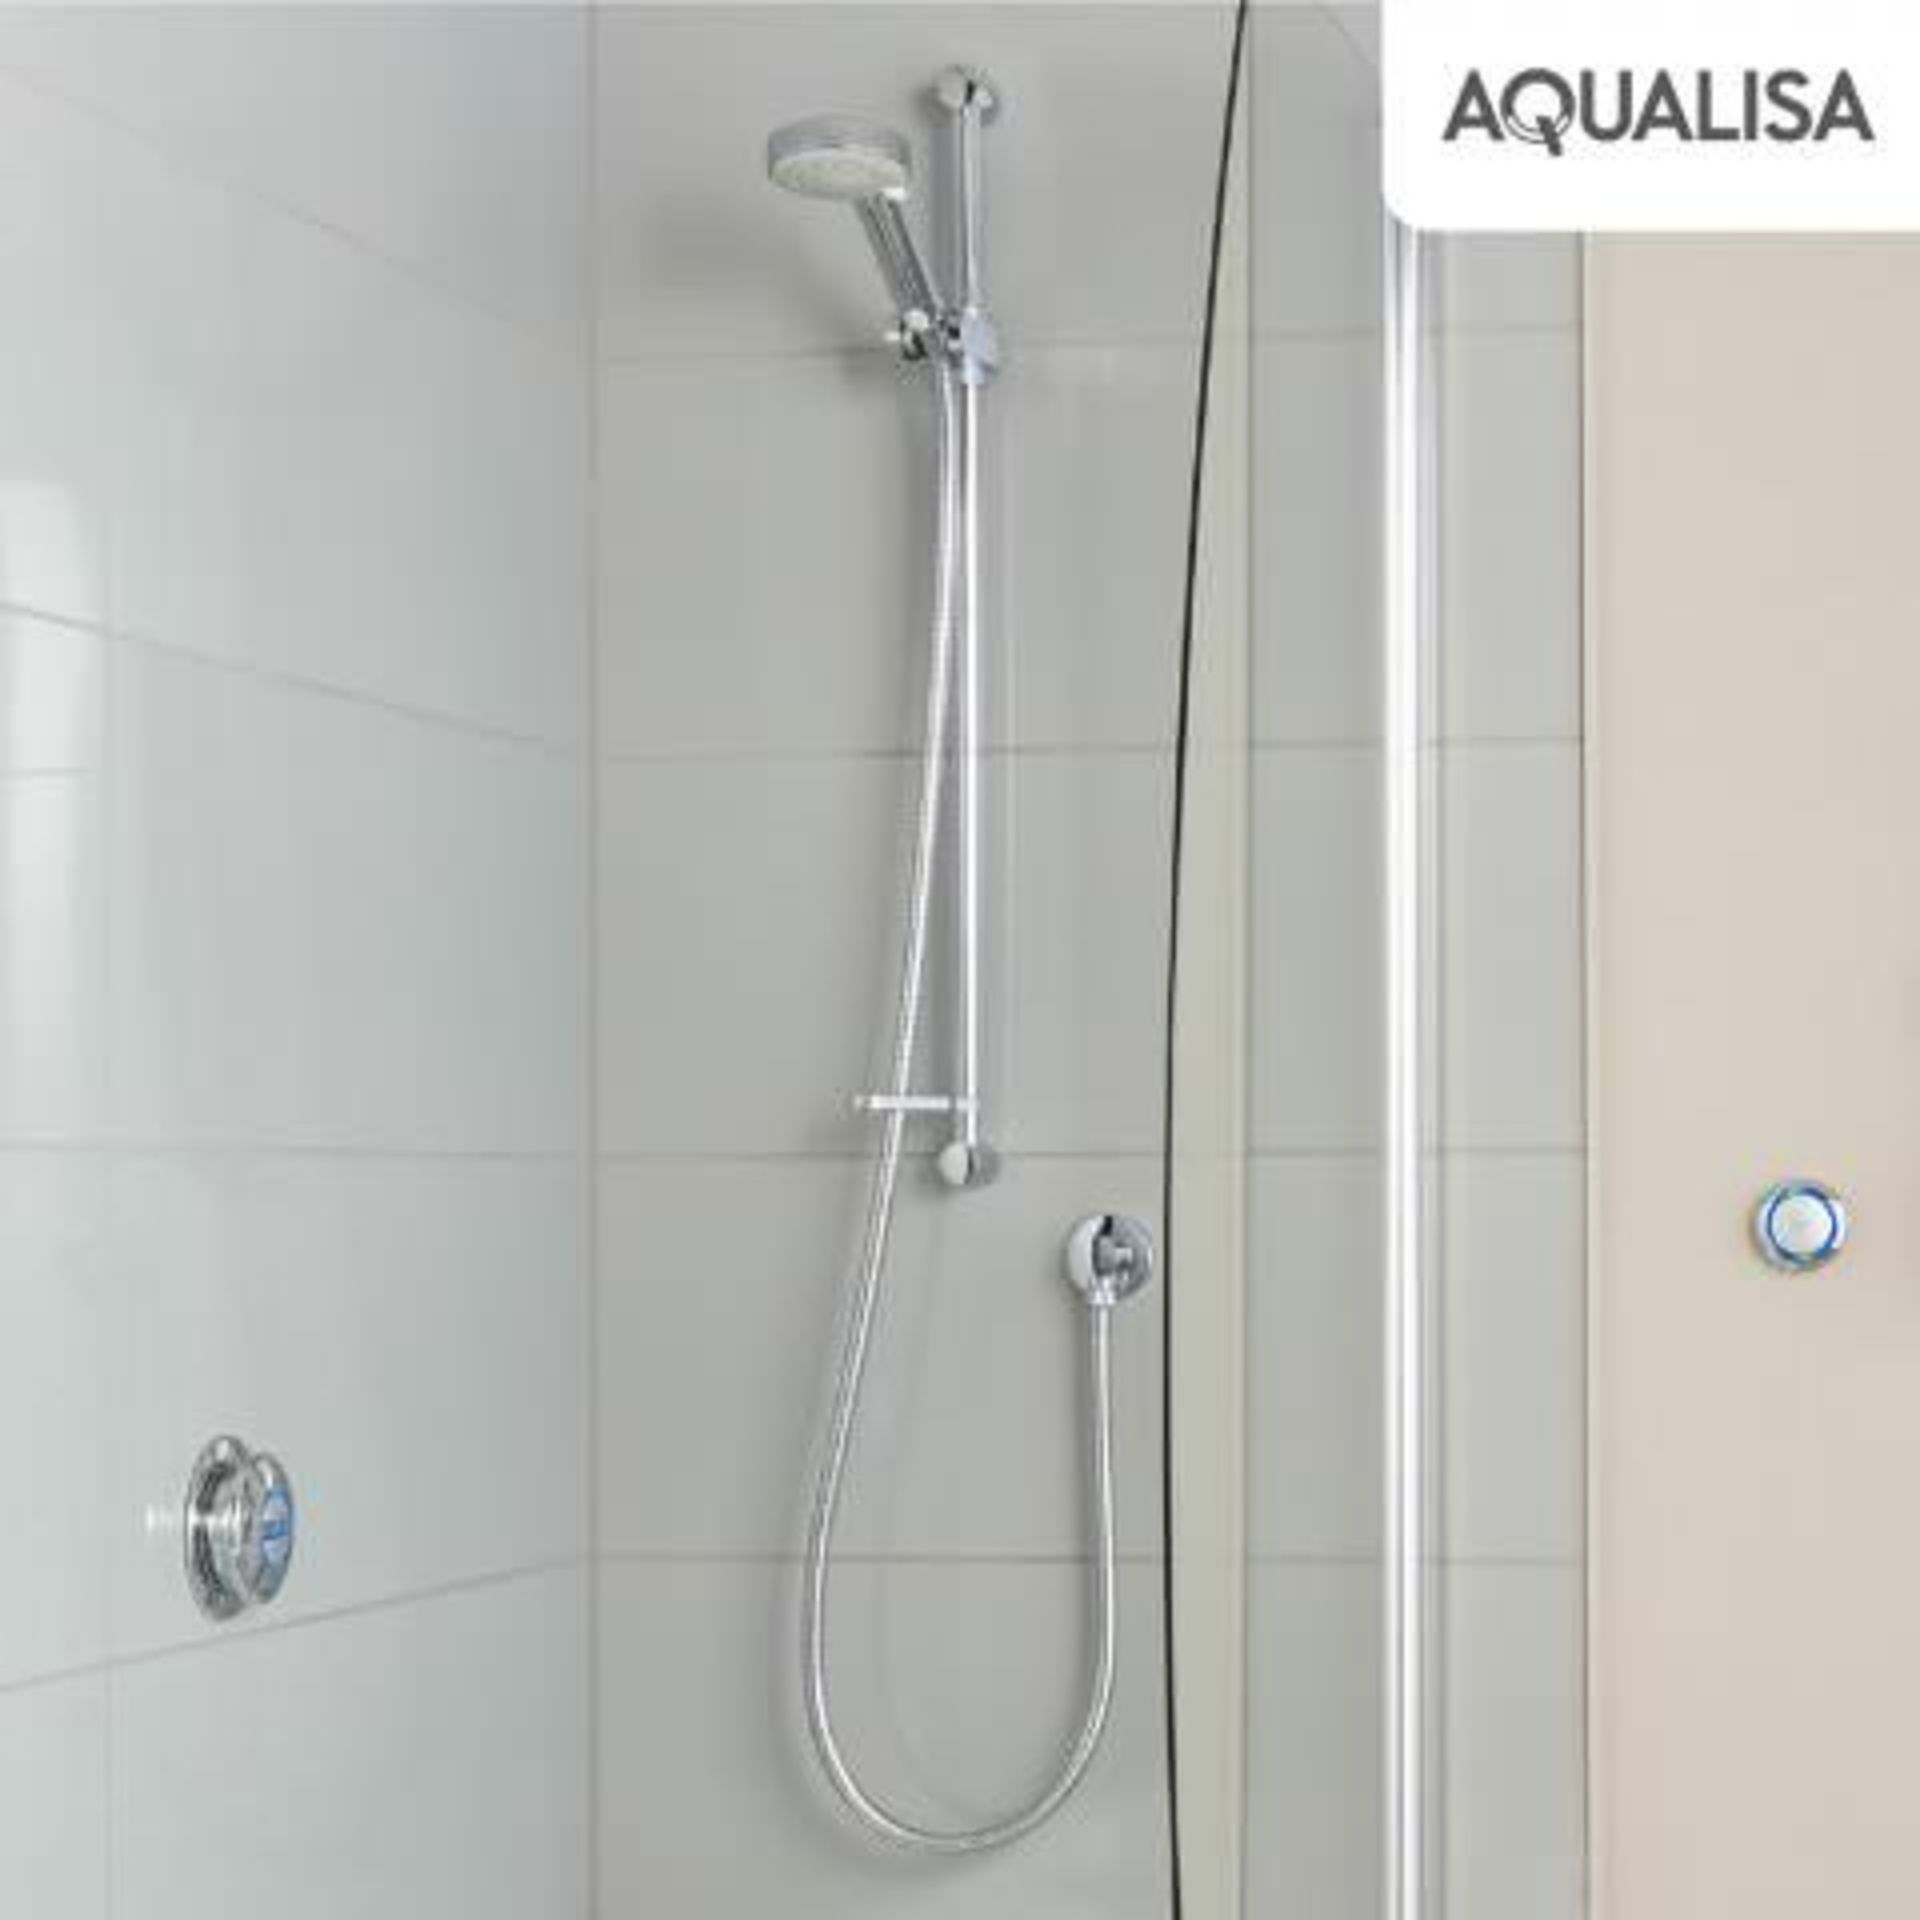 (AA12) Aqualisa Quartz Digital™ Concealed Shower - Pumped. RRP £999.99. Get the convenience and - Image 4 of 5